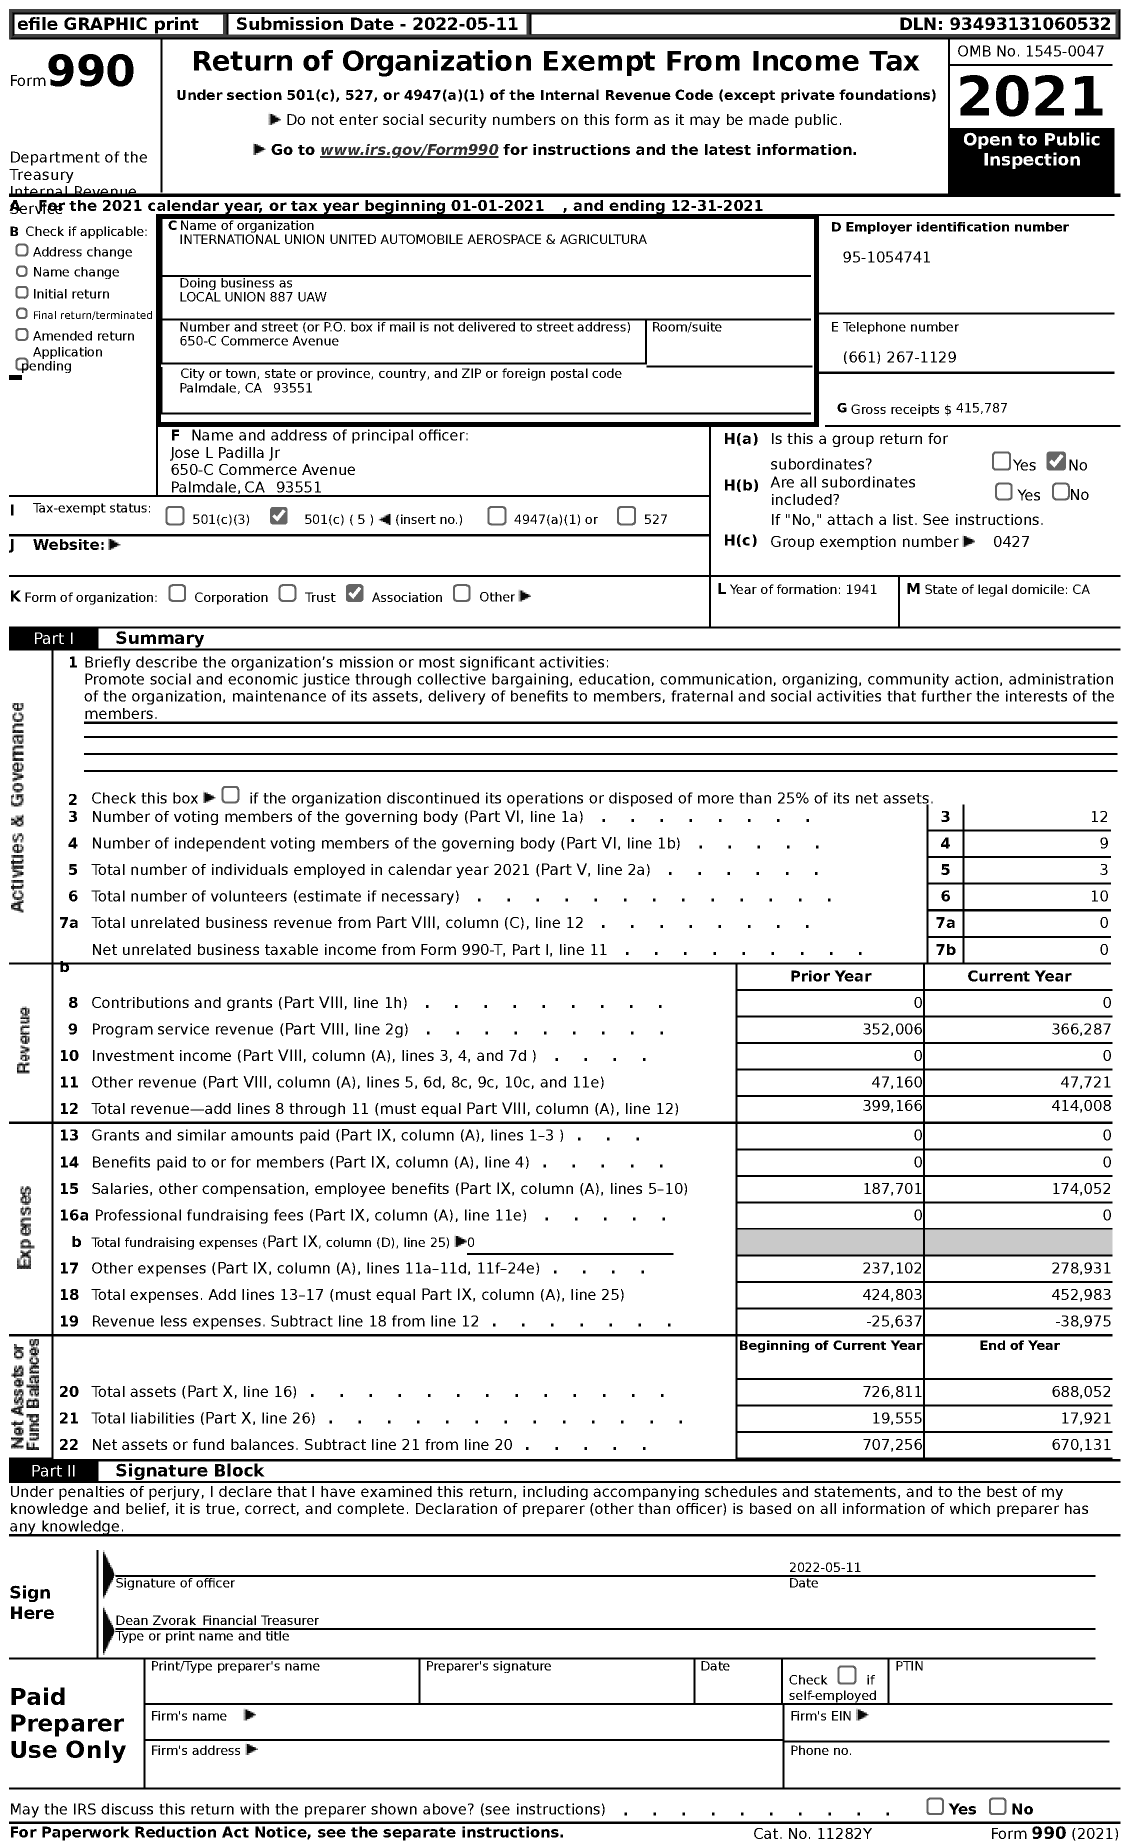 Image of first page of 2021 Form 990 for Uaw - Local Union 887 Uaw